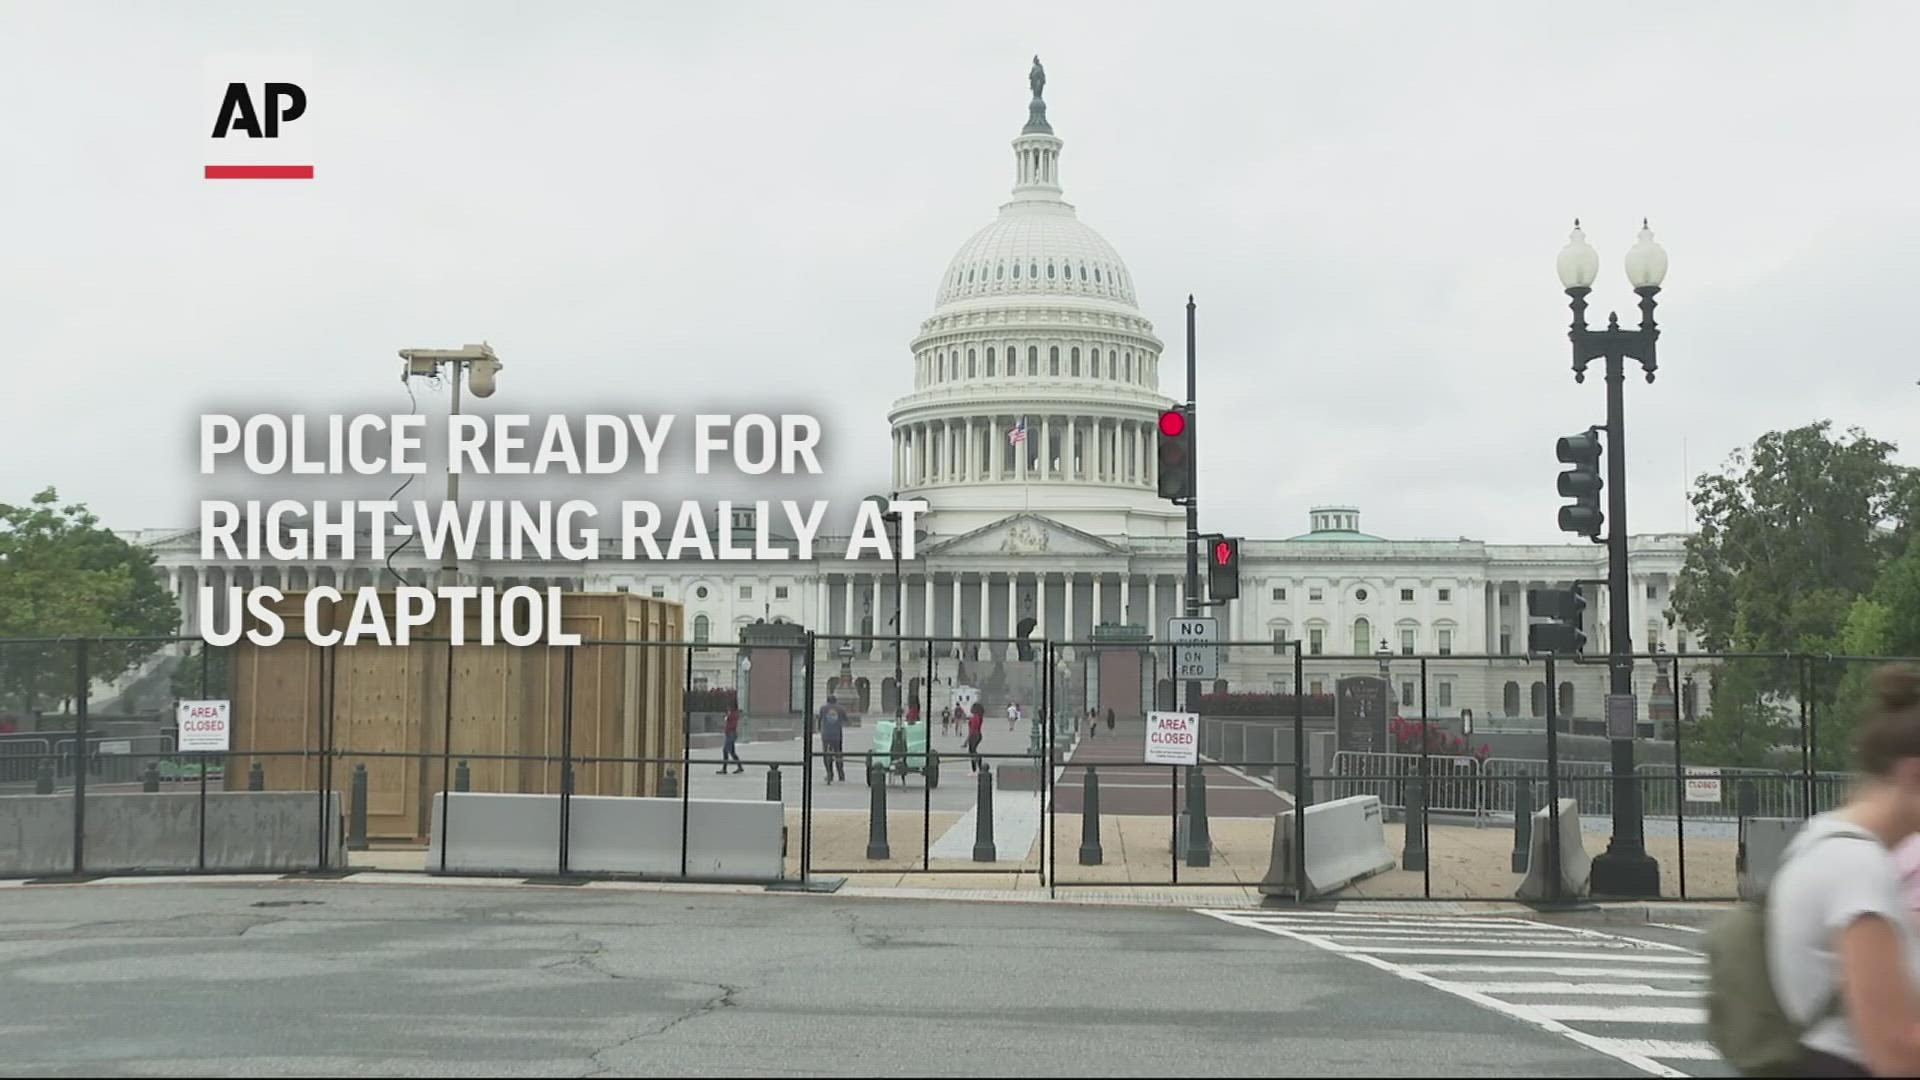 Authorities are taking no chances as they prepare for Saturday's rally at the U.S. Capitol in support of rioters imprisoned after the Jan. 6 riot.